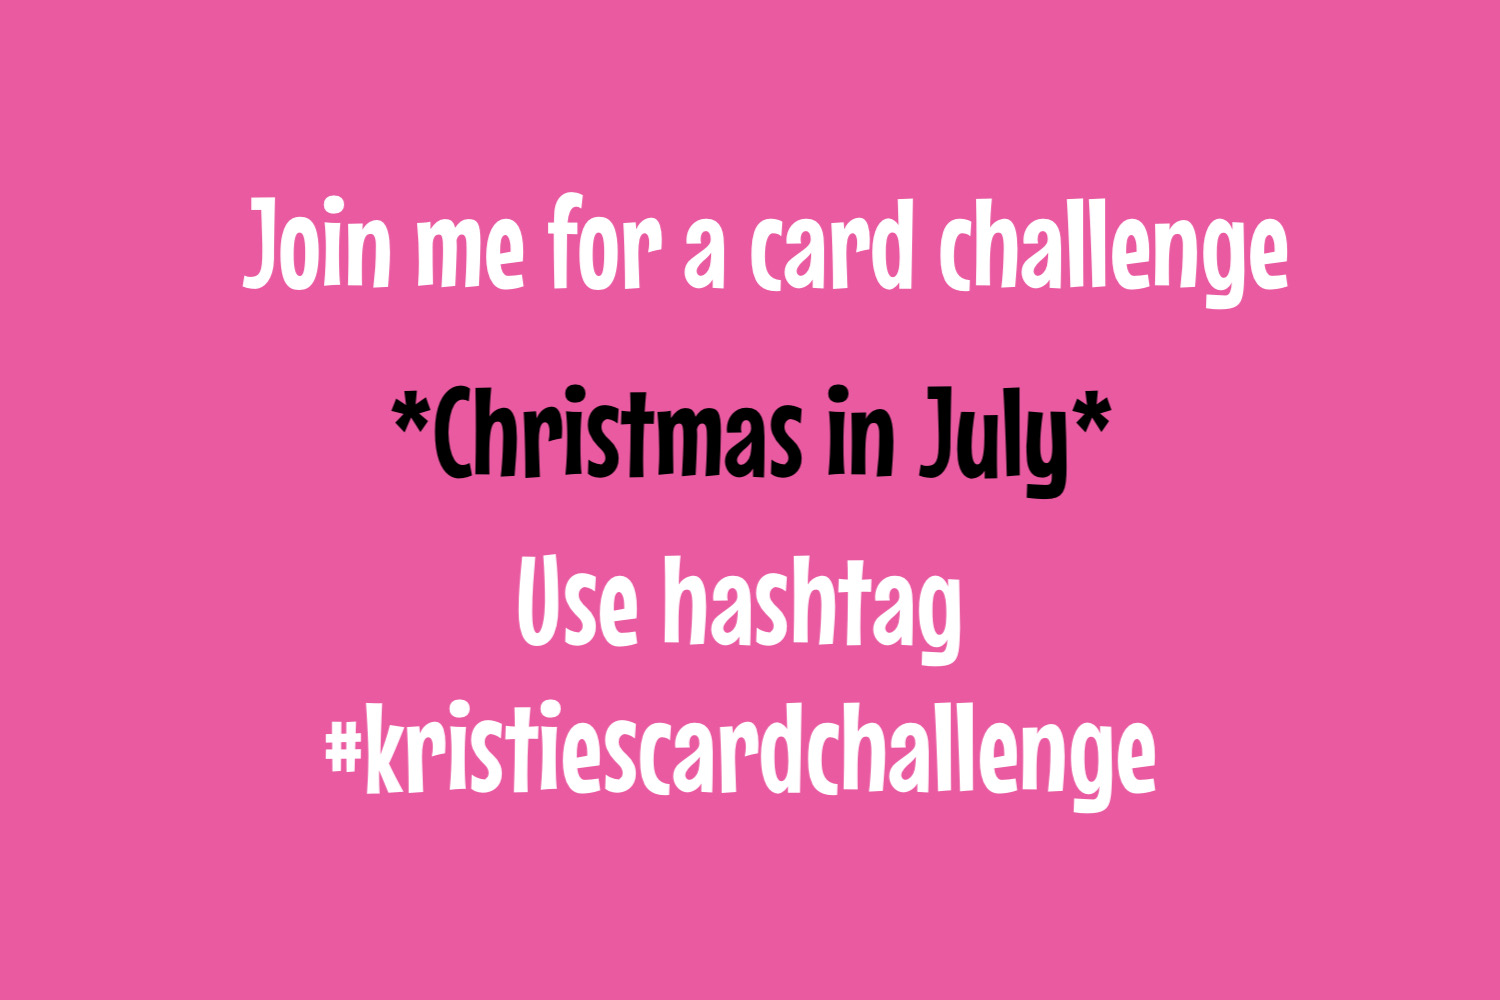 Kristie’s Card Challenge – Christmas in July